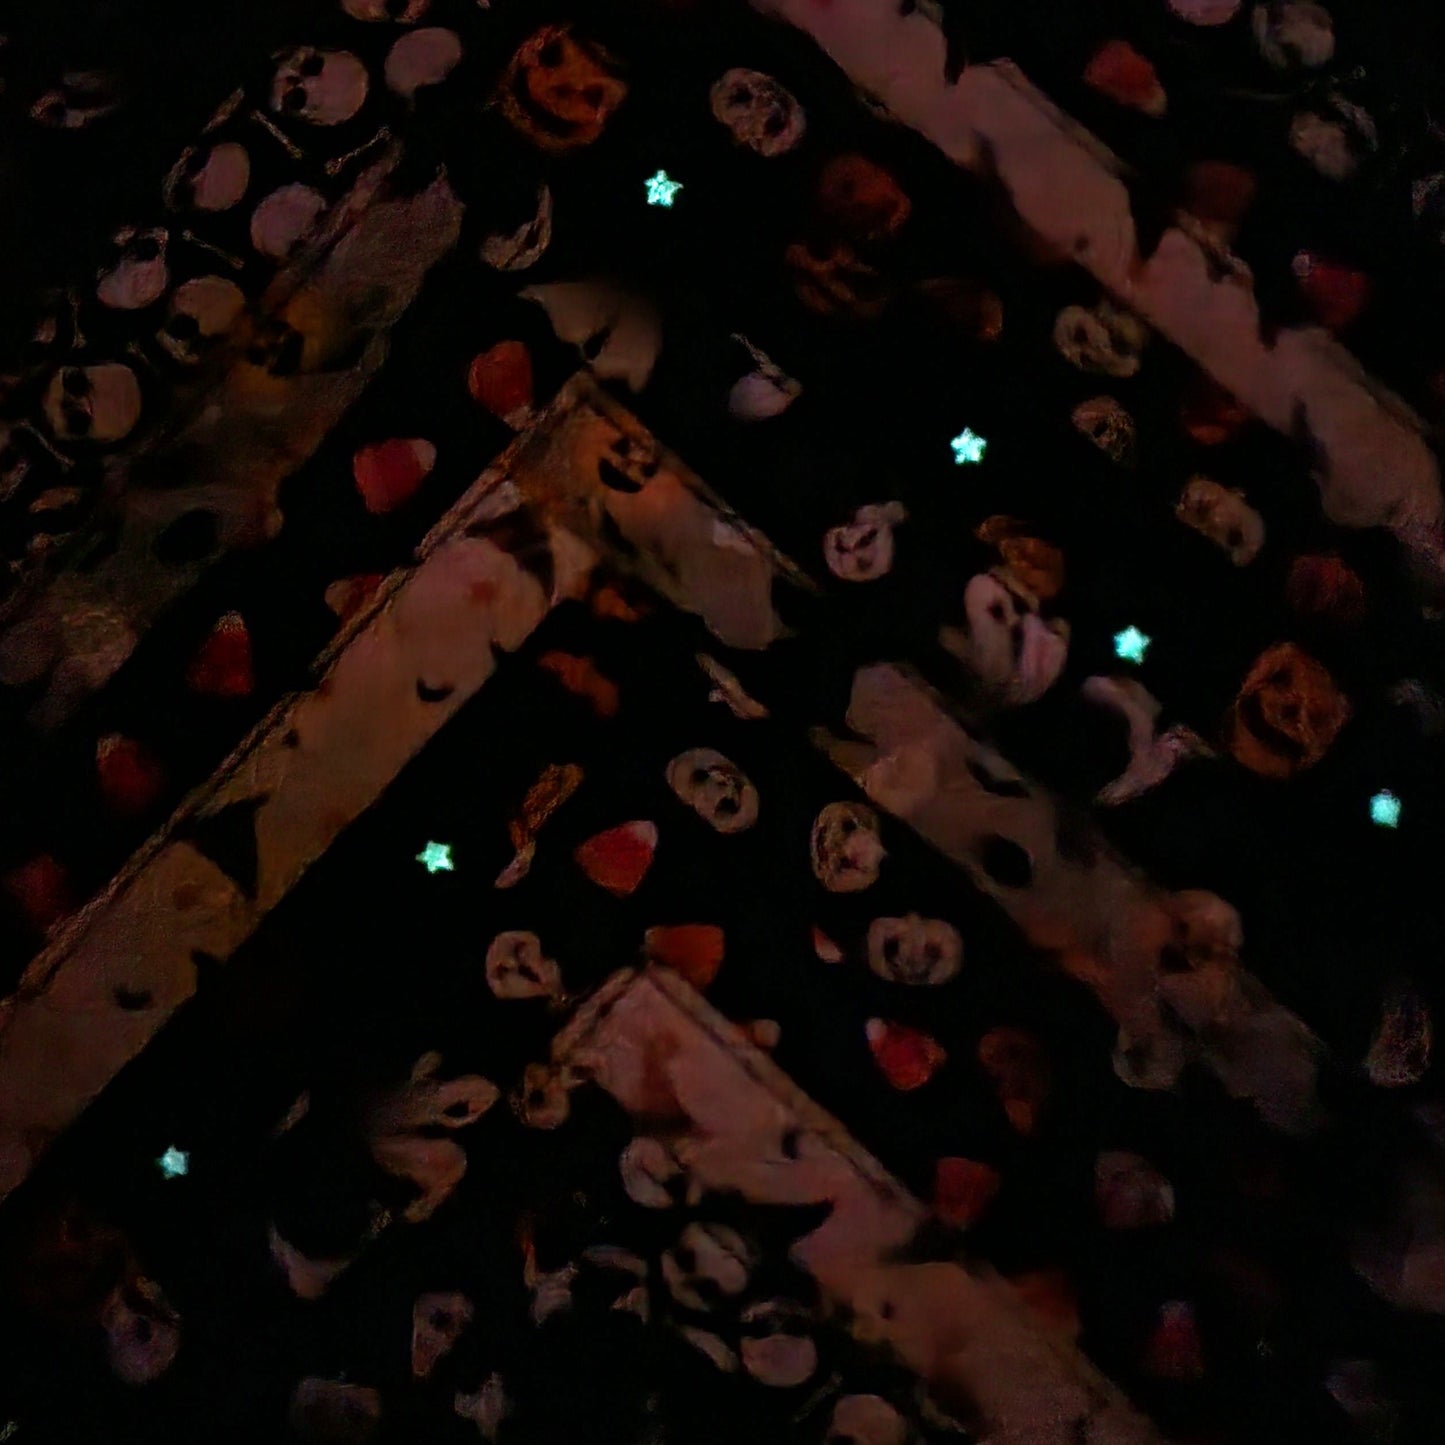 Halloween Quilted Table Runner - Glow in the Dark Stars